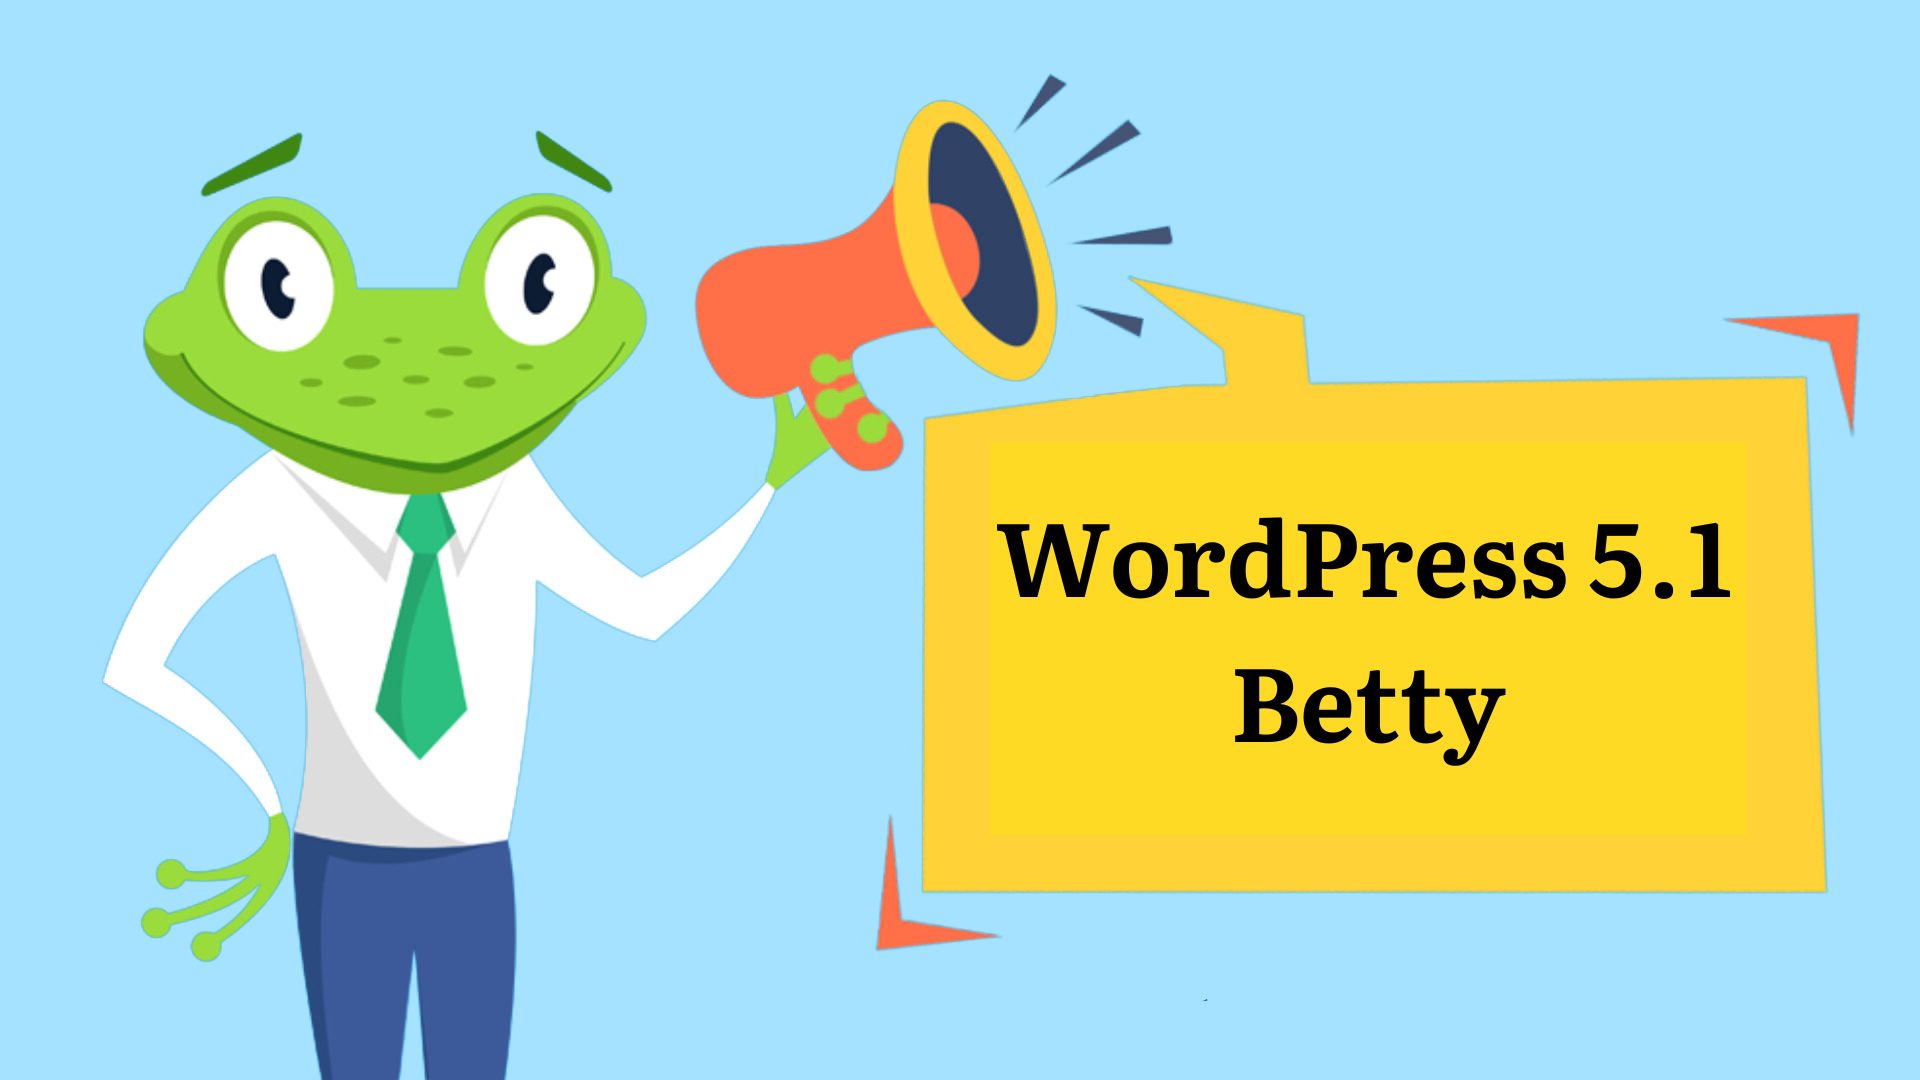 WordPress Version 5.1 "Betty" Is Available!